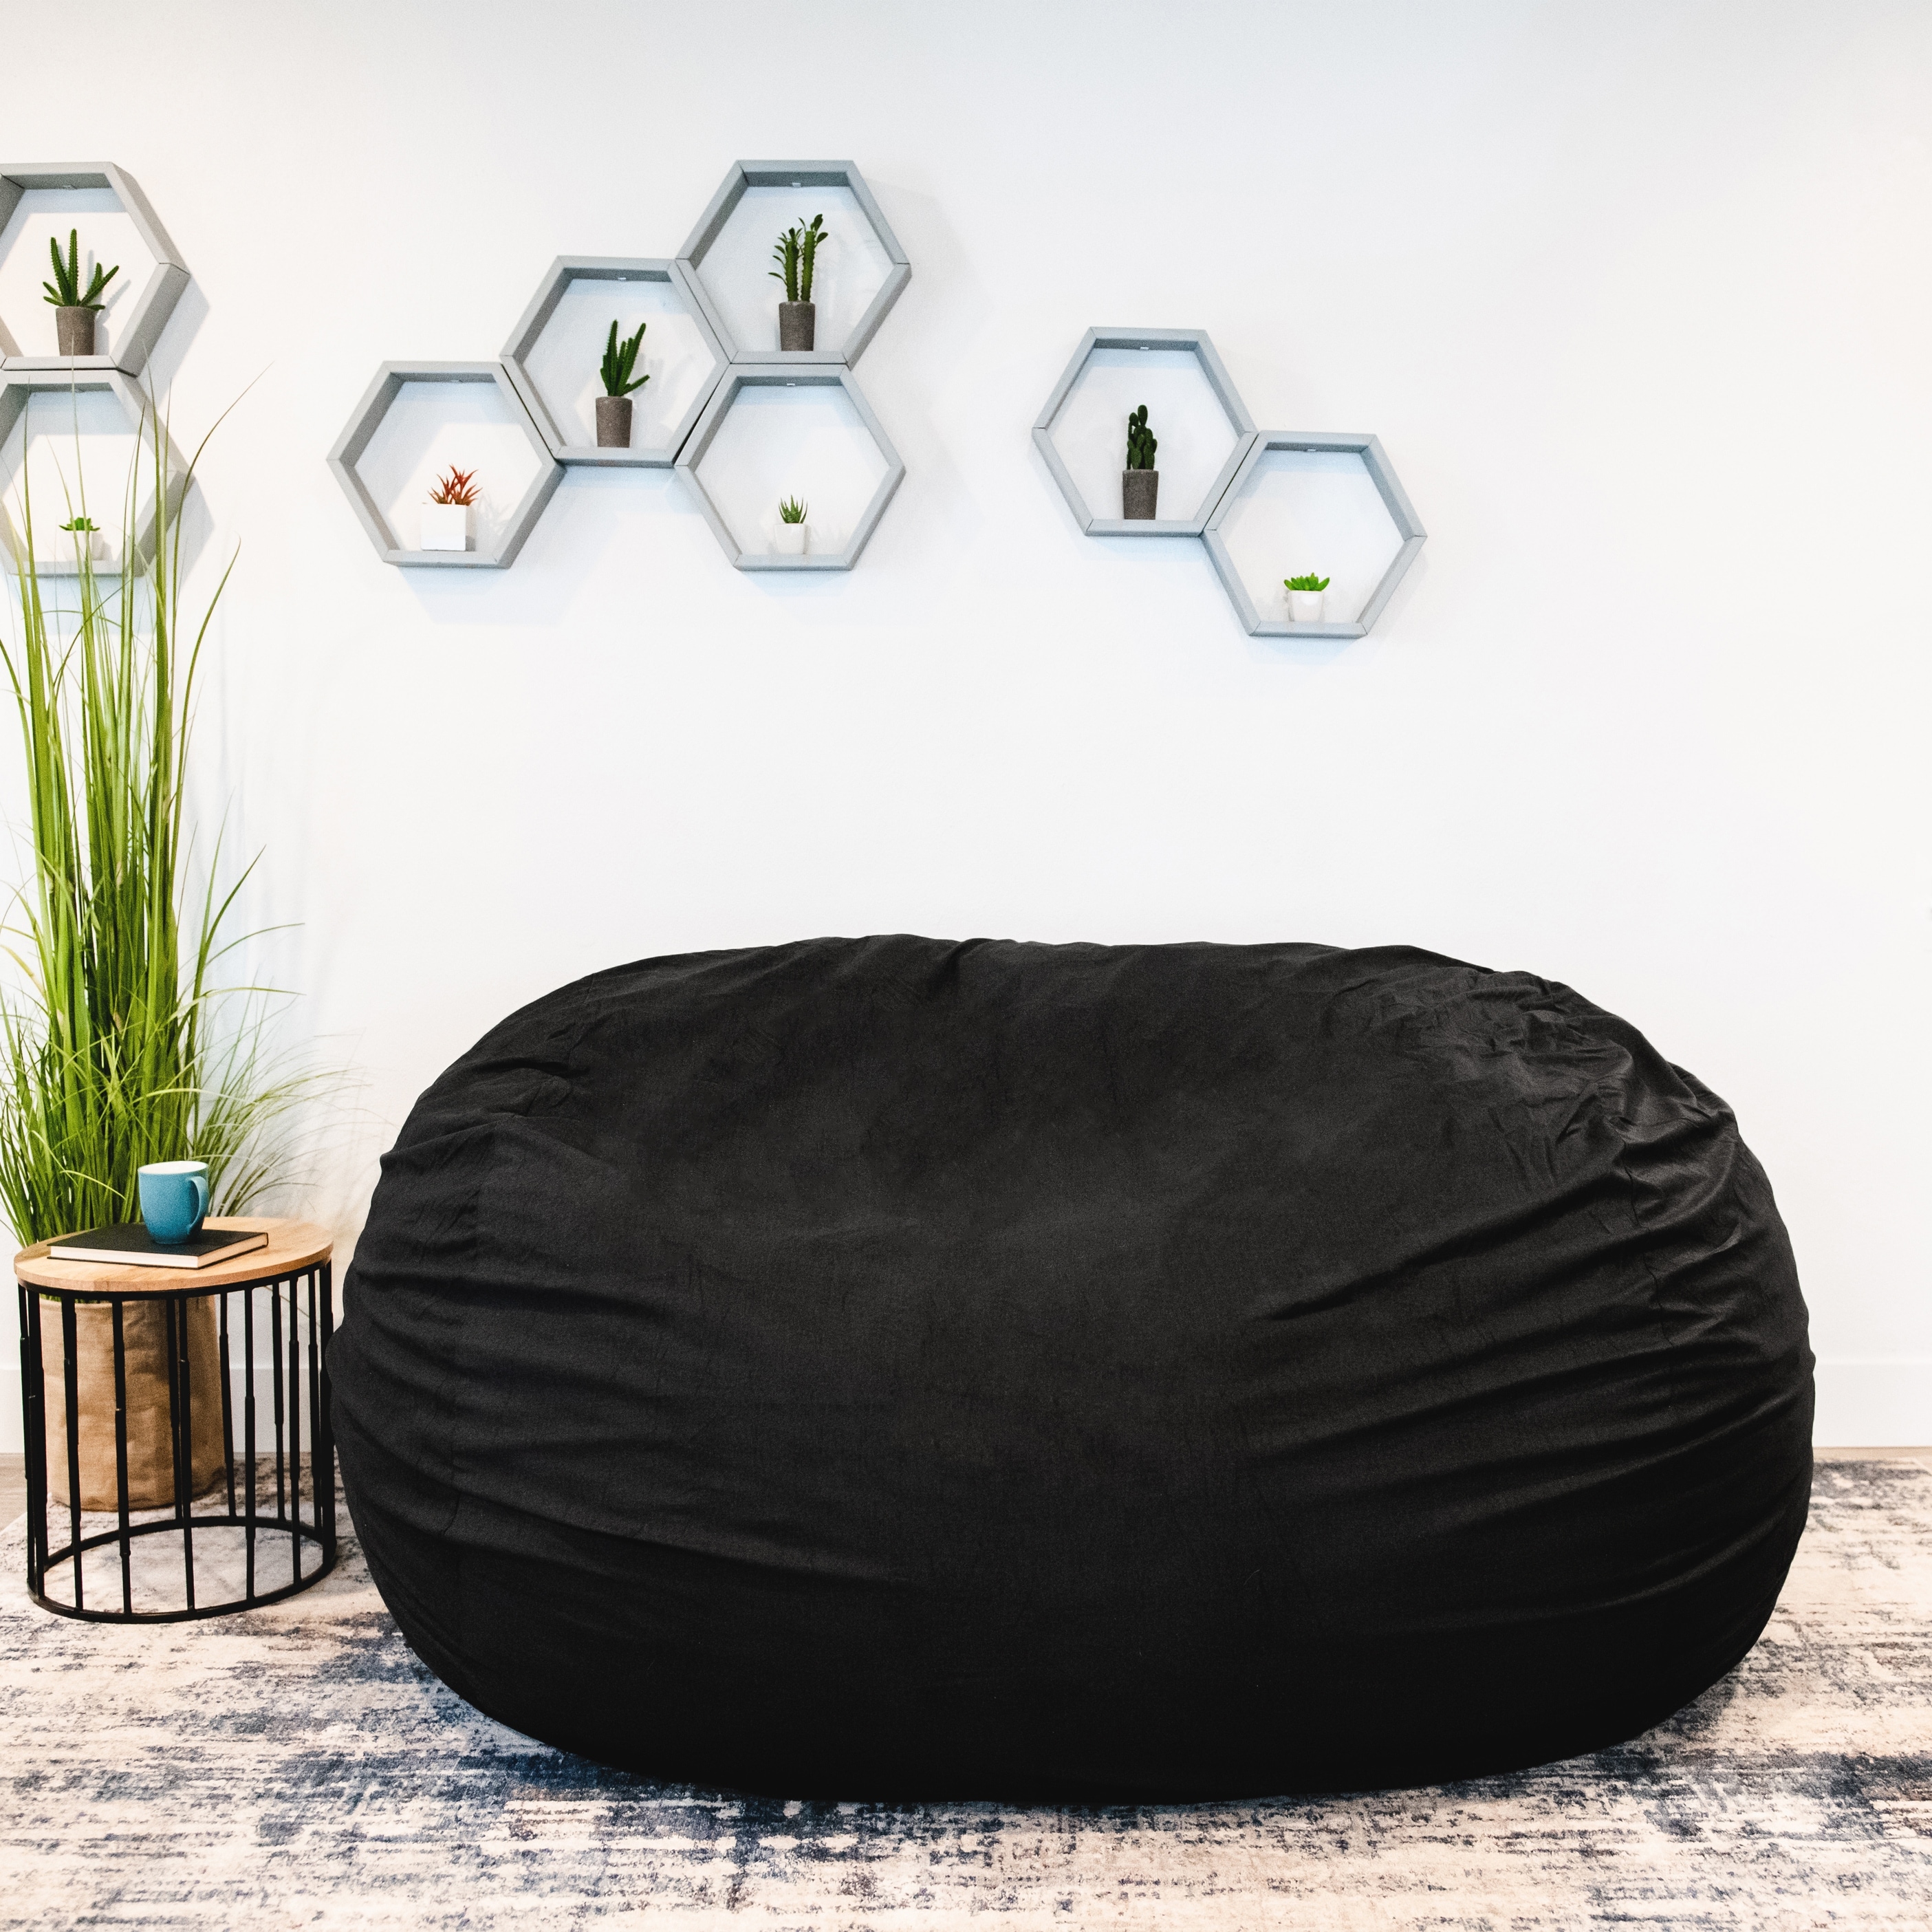 https://ak1.ostkcdn.com/images/products/is/images/direct/8baf610f4438c2a7164e60ebc2d1e26f35c4ca16/Big-Joe-XXL-Fuf-Bean-Bag-Chair-%28Removable-Cover%29.jpg